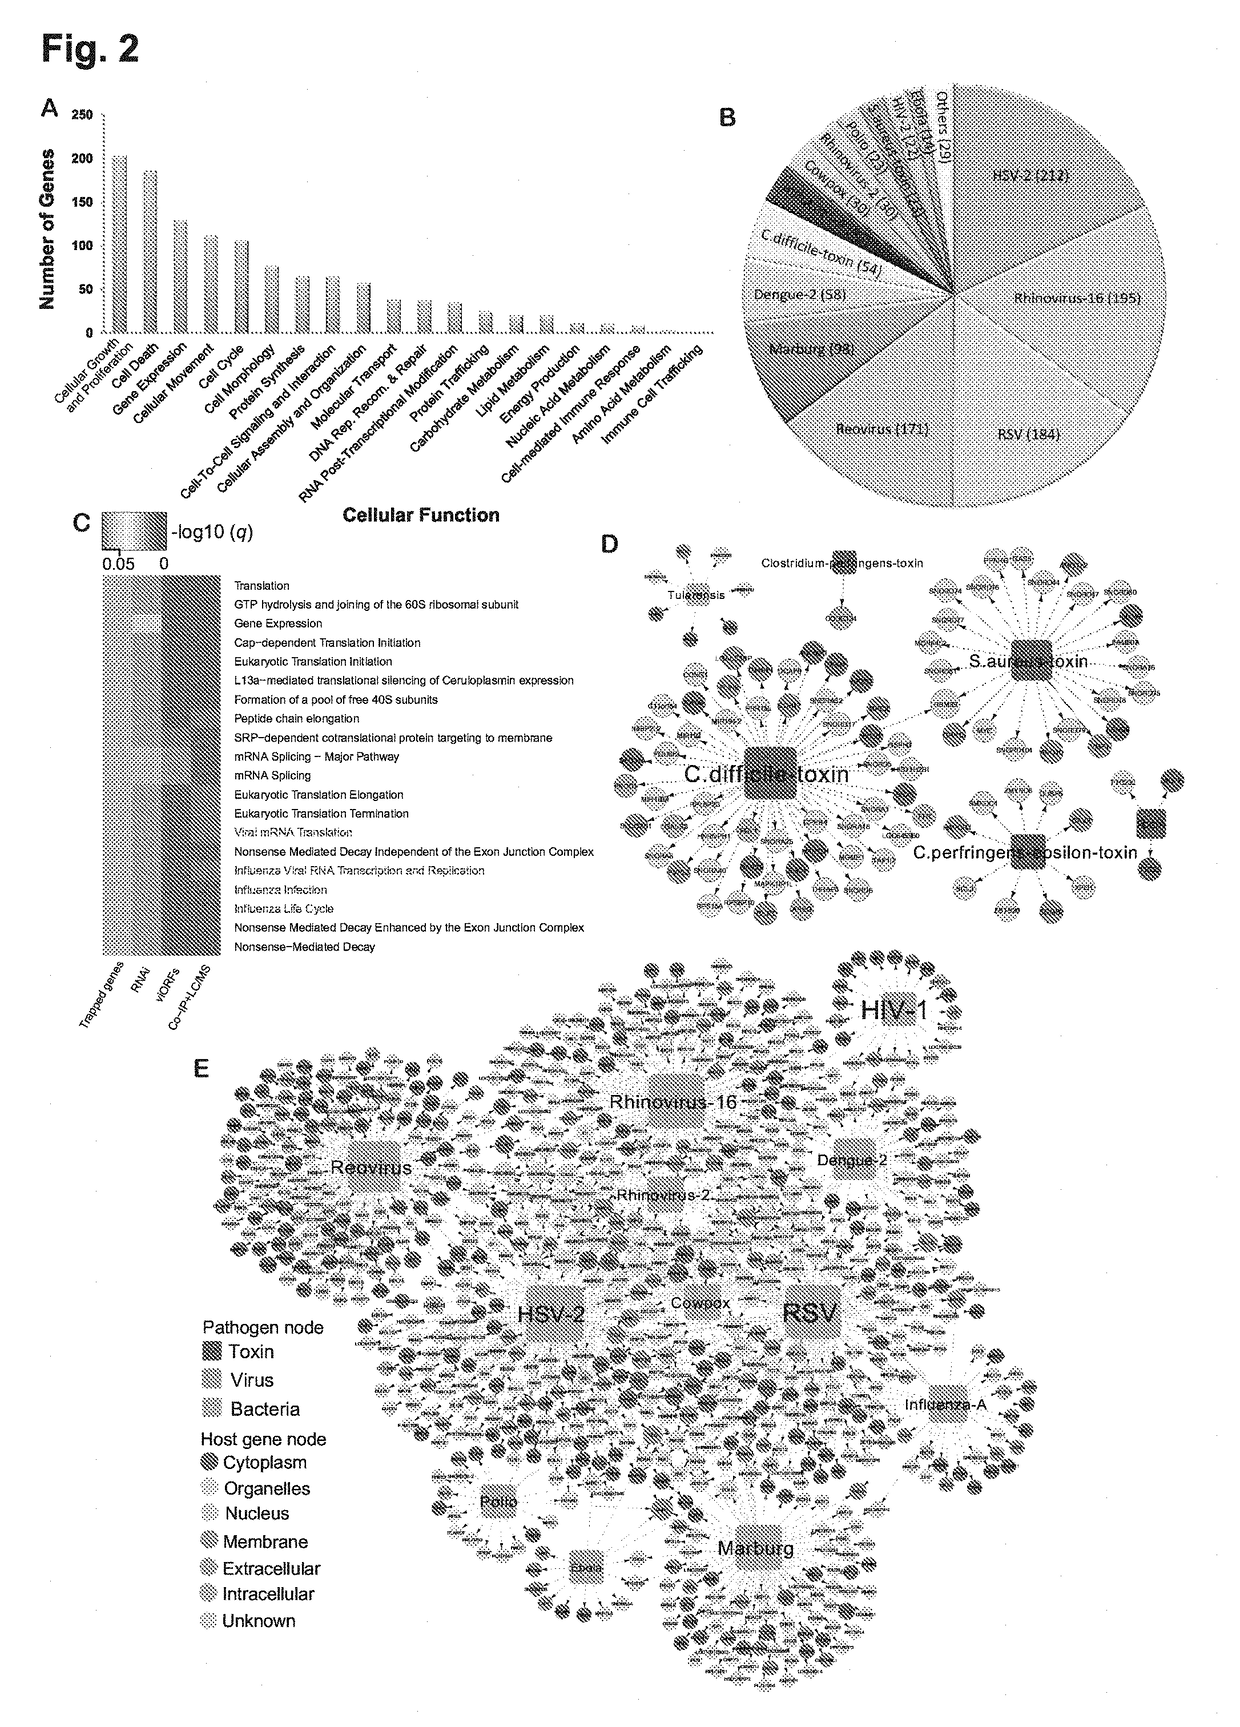 Identification of cellular antimicrobial drug tablets through interactome analysis